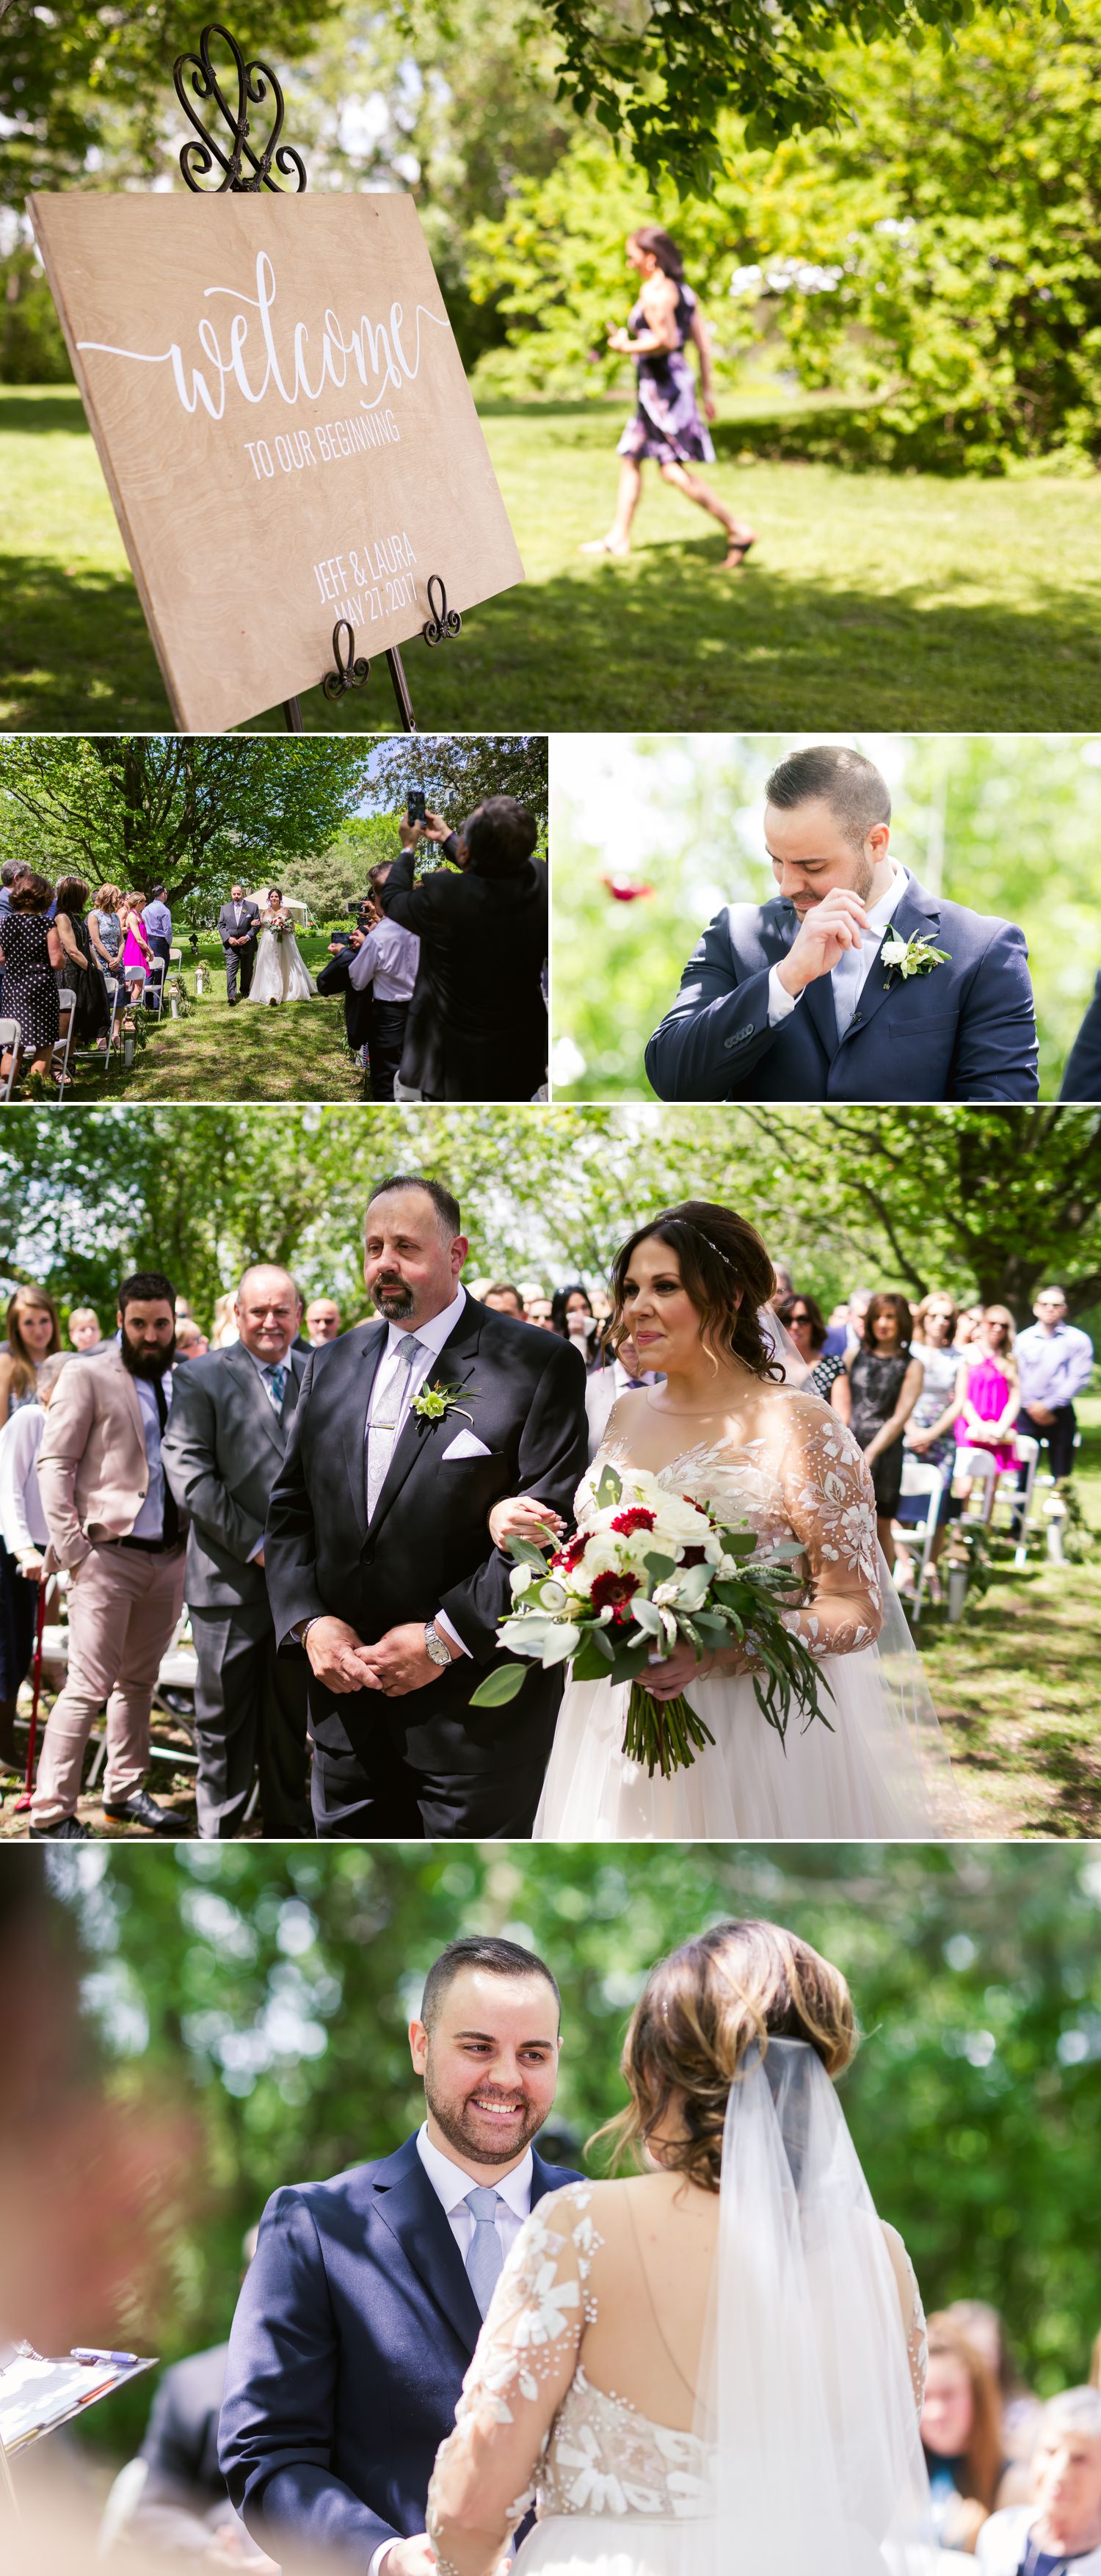 A spring wedding ceremony outside at Billings Estate in Ottawa